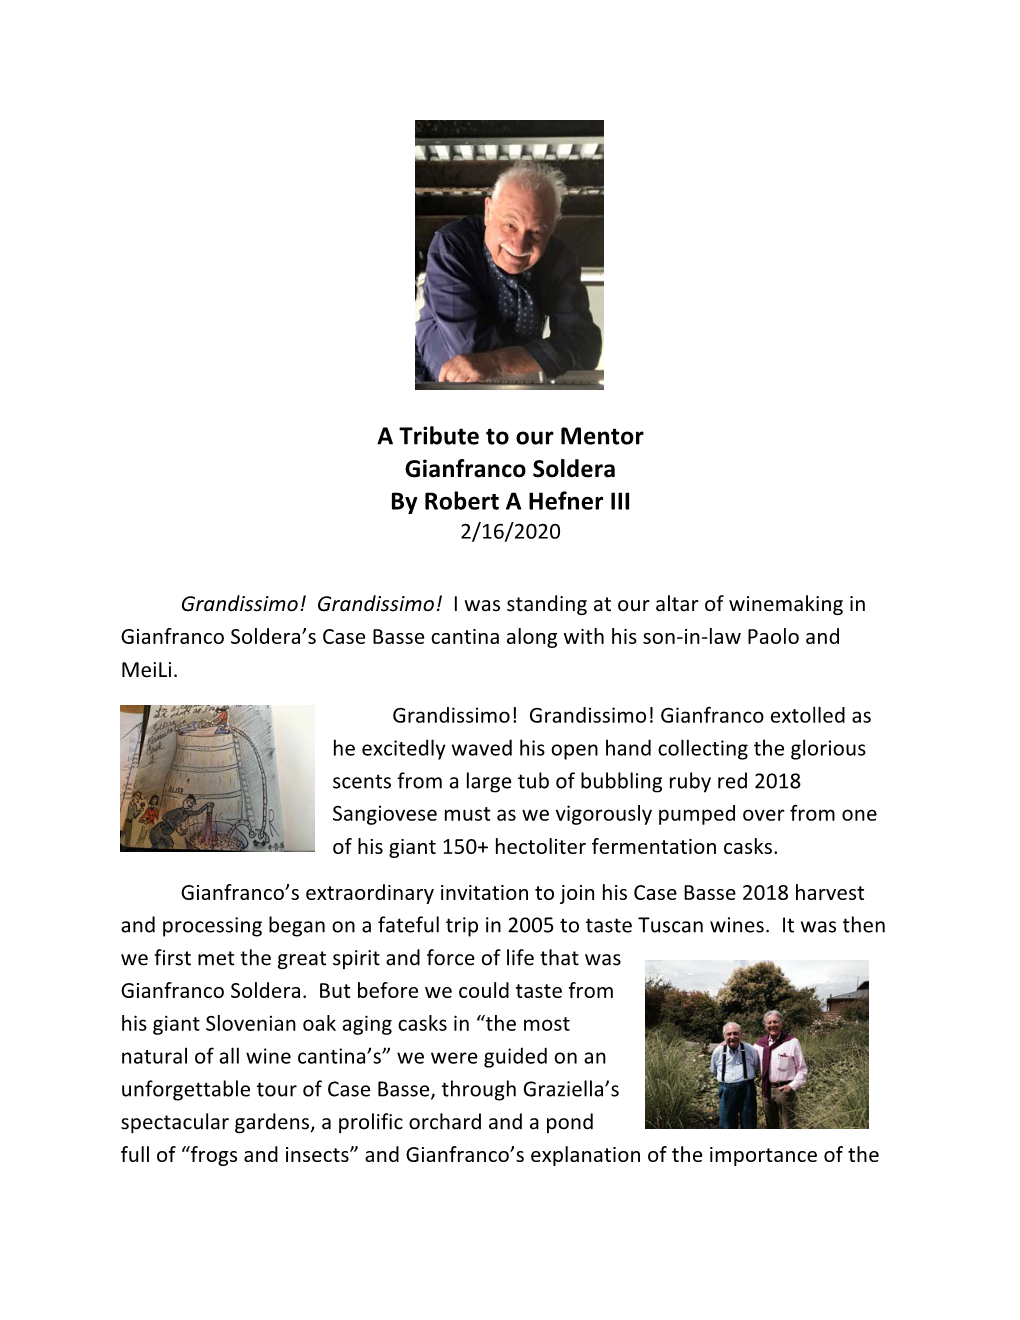 A Tribute to Our Mentor Gianfranco Soldera by Robert a Hefner III 2/16/2020